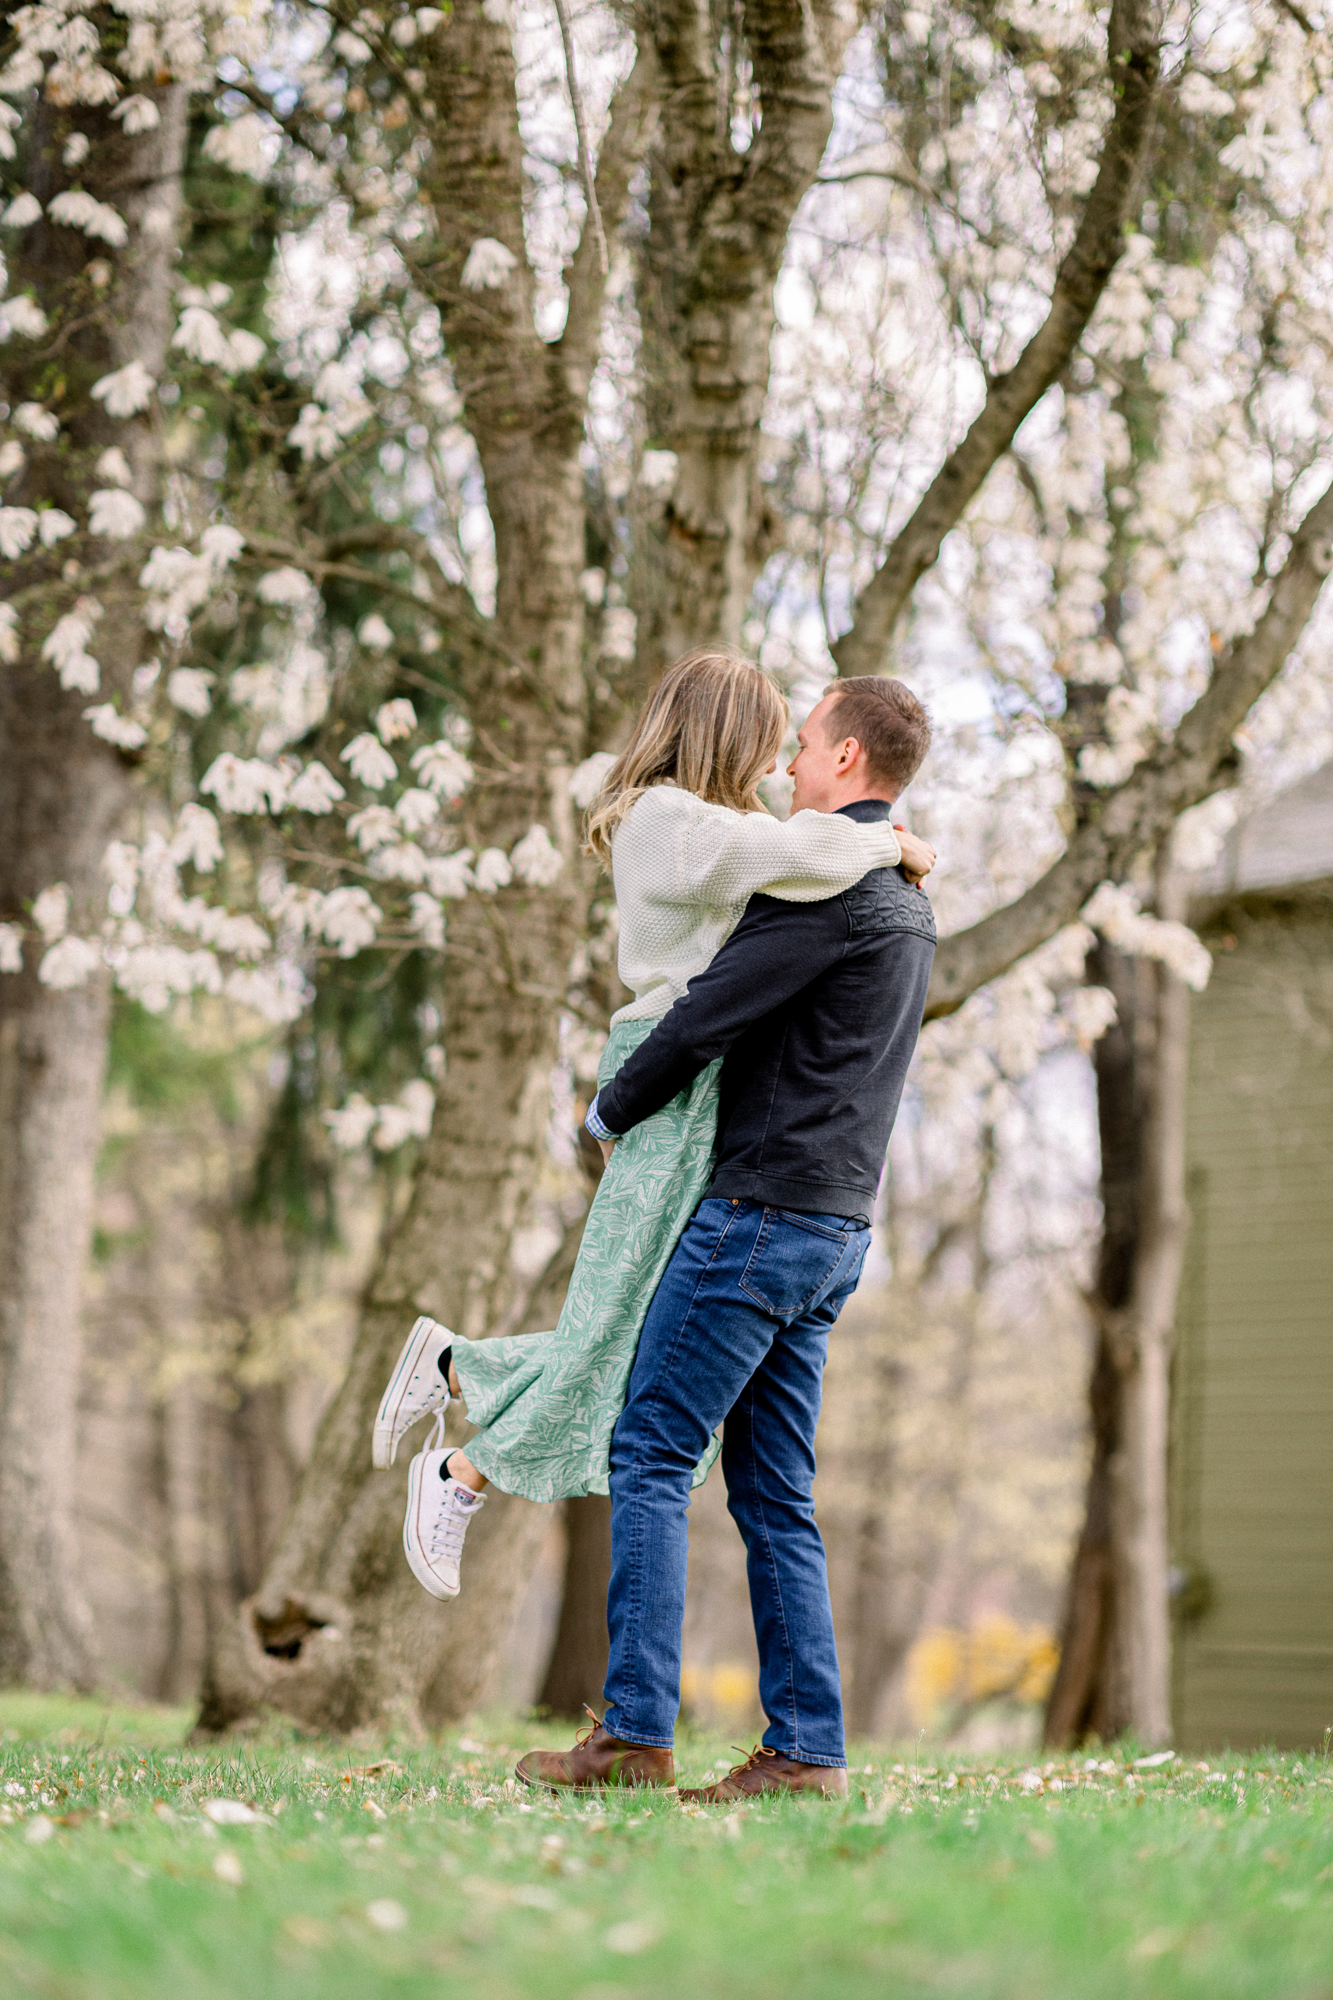 Playful New York Engagement Photography with Spring Blossoms